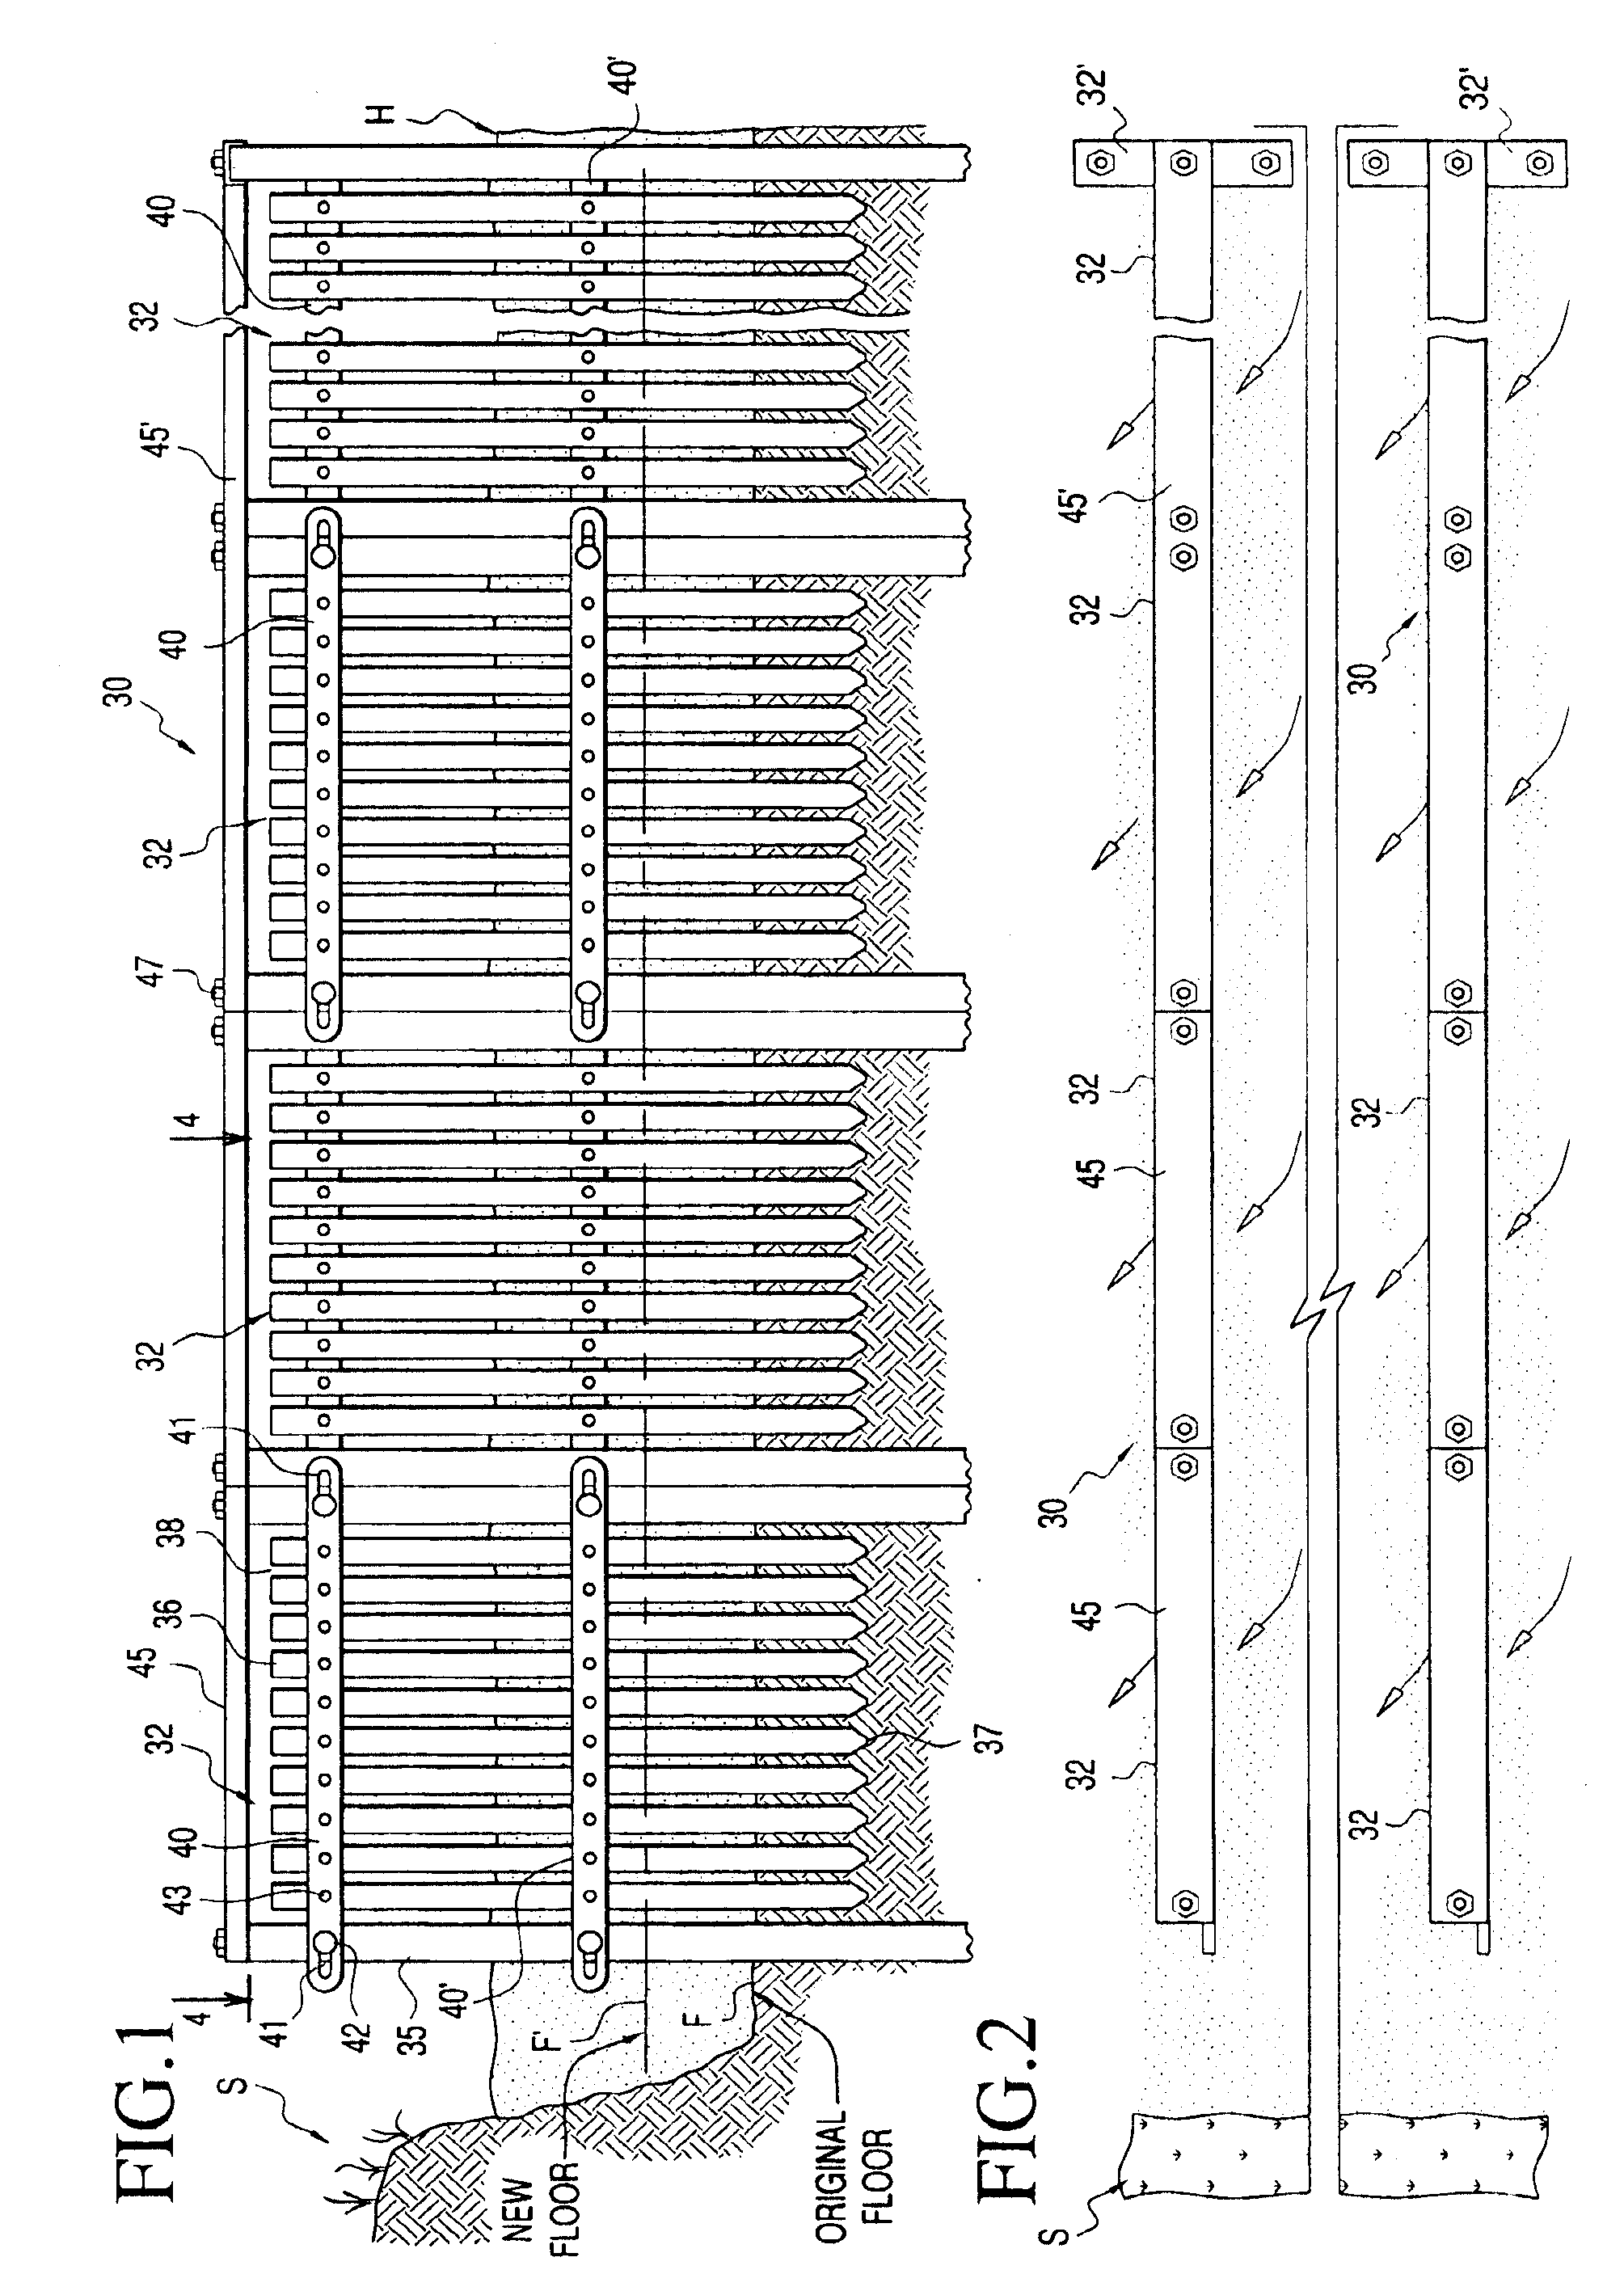 Permanent and semi-permanent groyne structures and method for shoreline and land mass reclamation